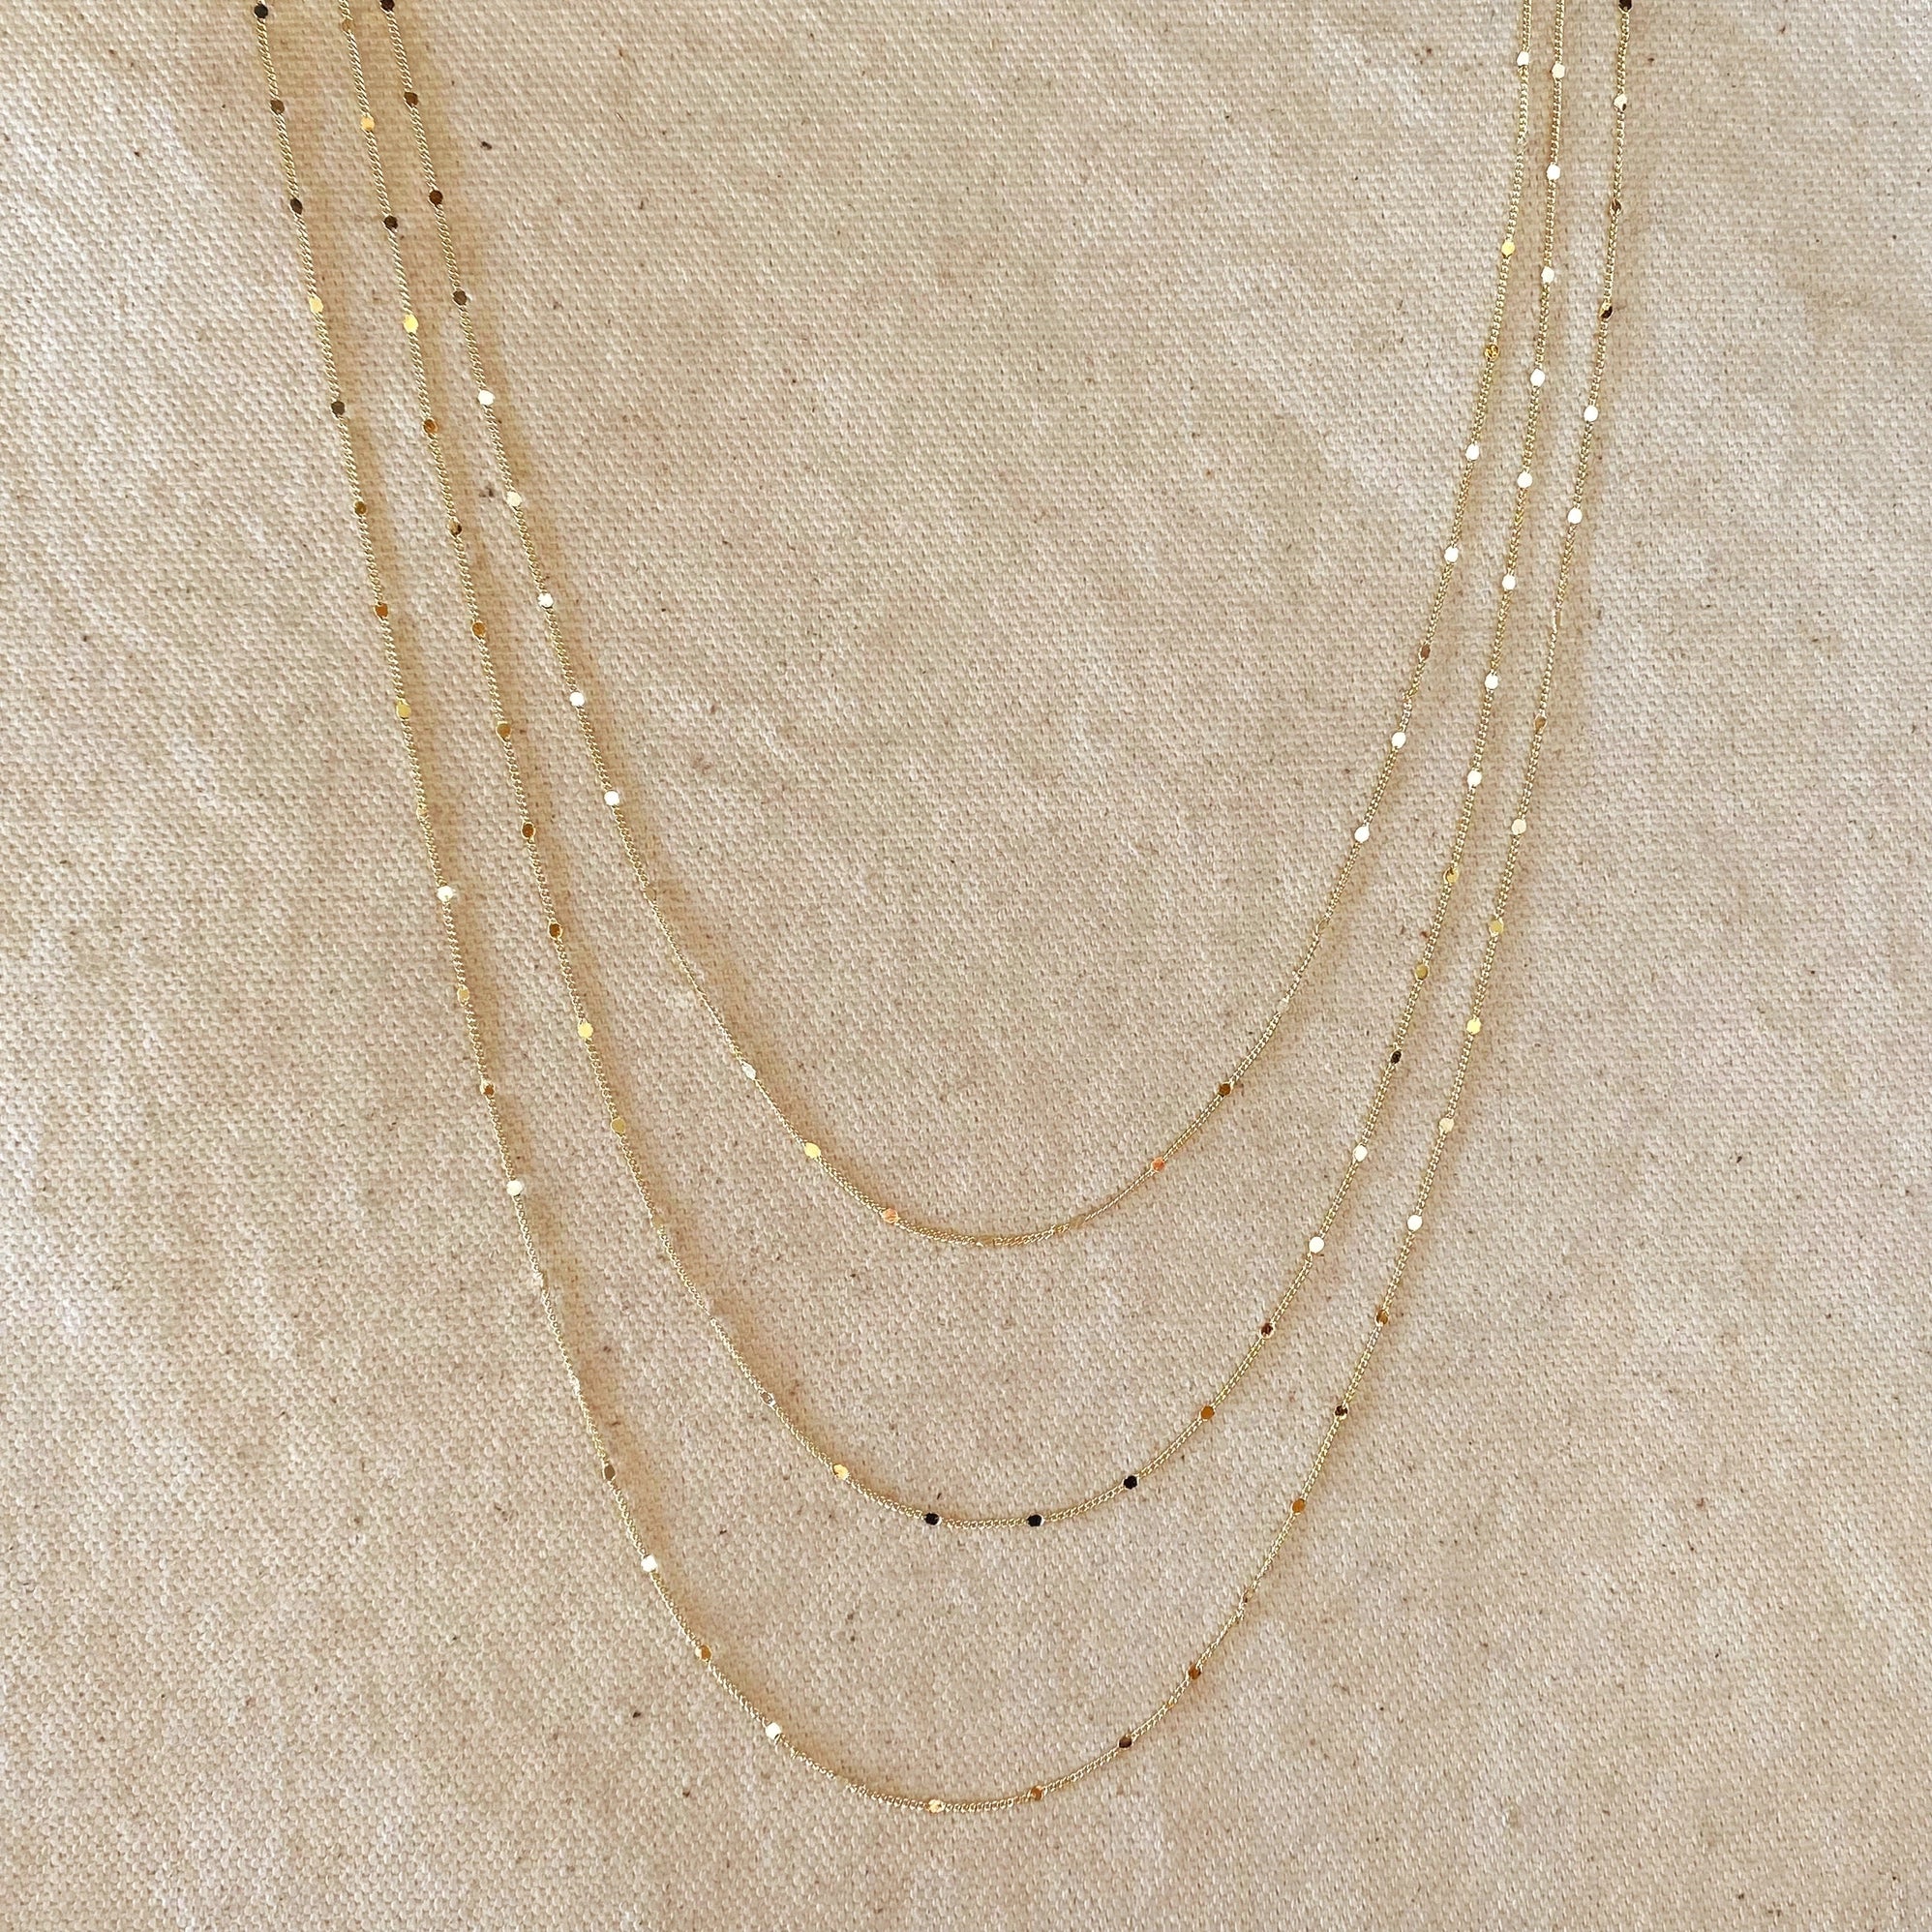 Pressed Chain Necklace, 18k Gold Filled